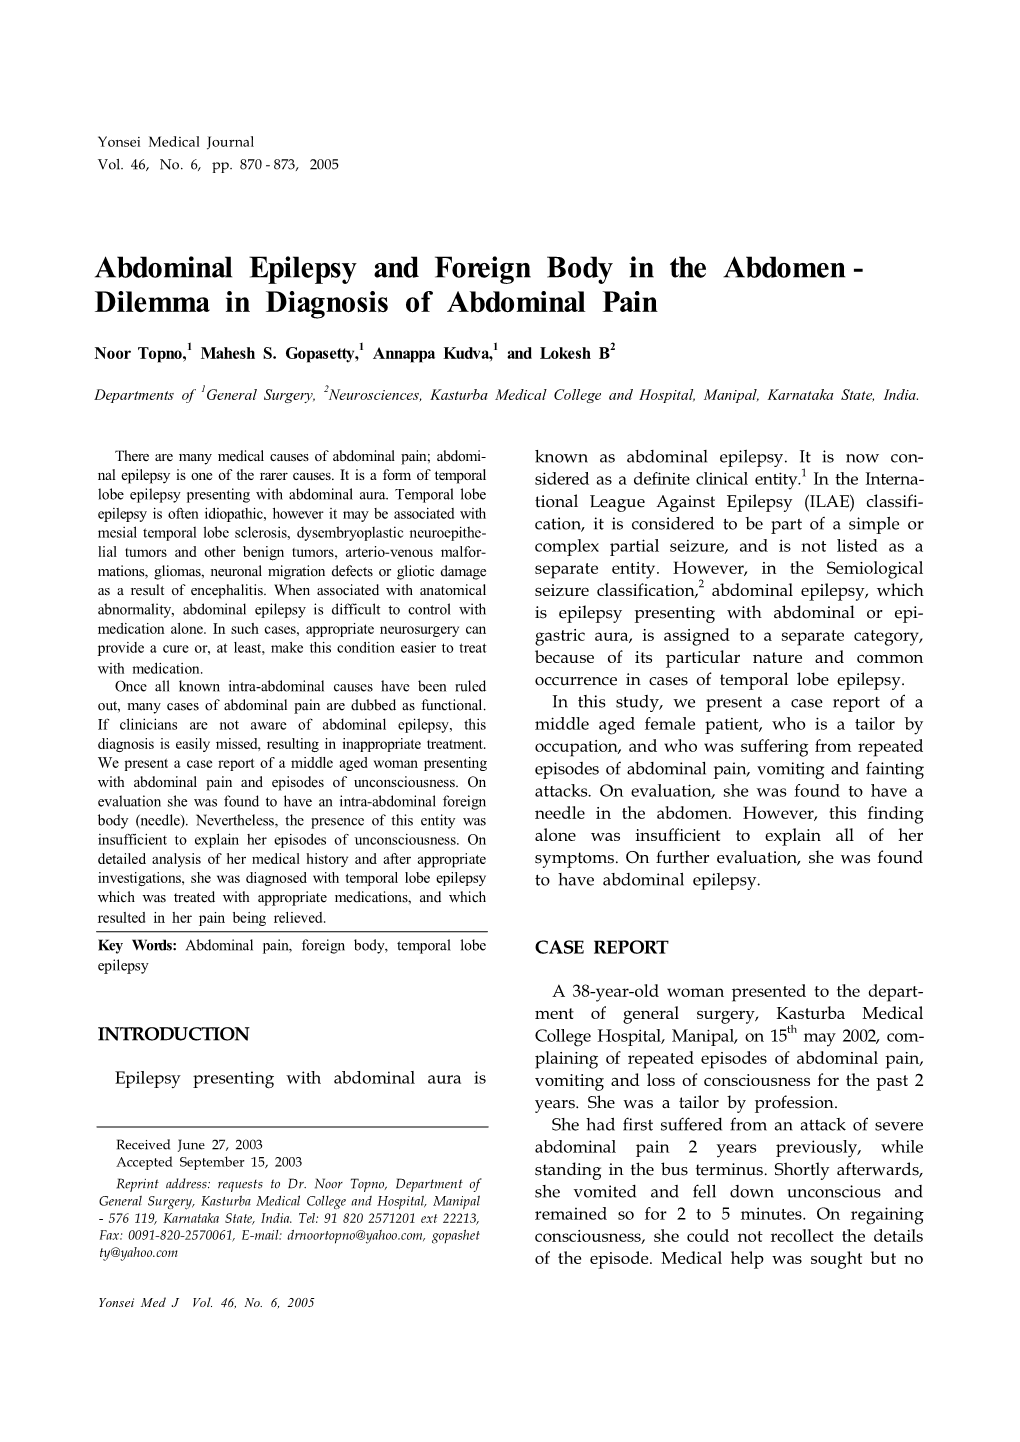 Abdominal Epilepsy and Foreign Body in the Abdomen - Dilemma in Diagnosis of Abdominal Pain